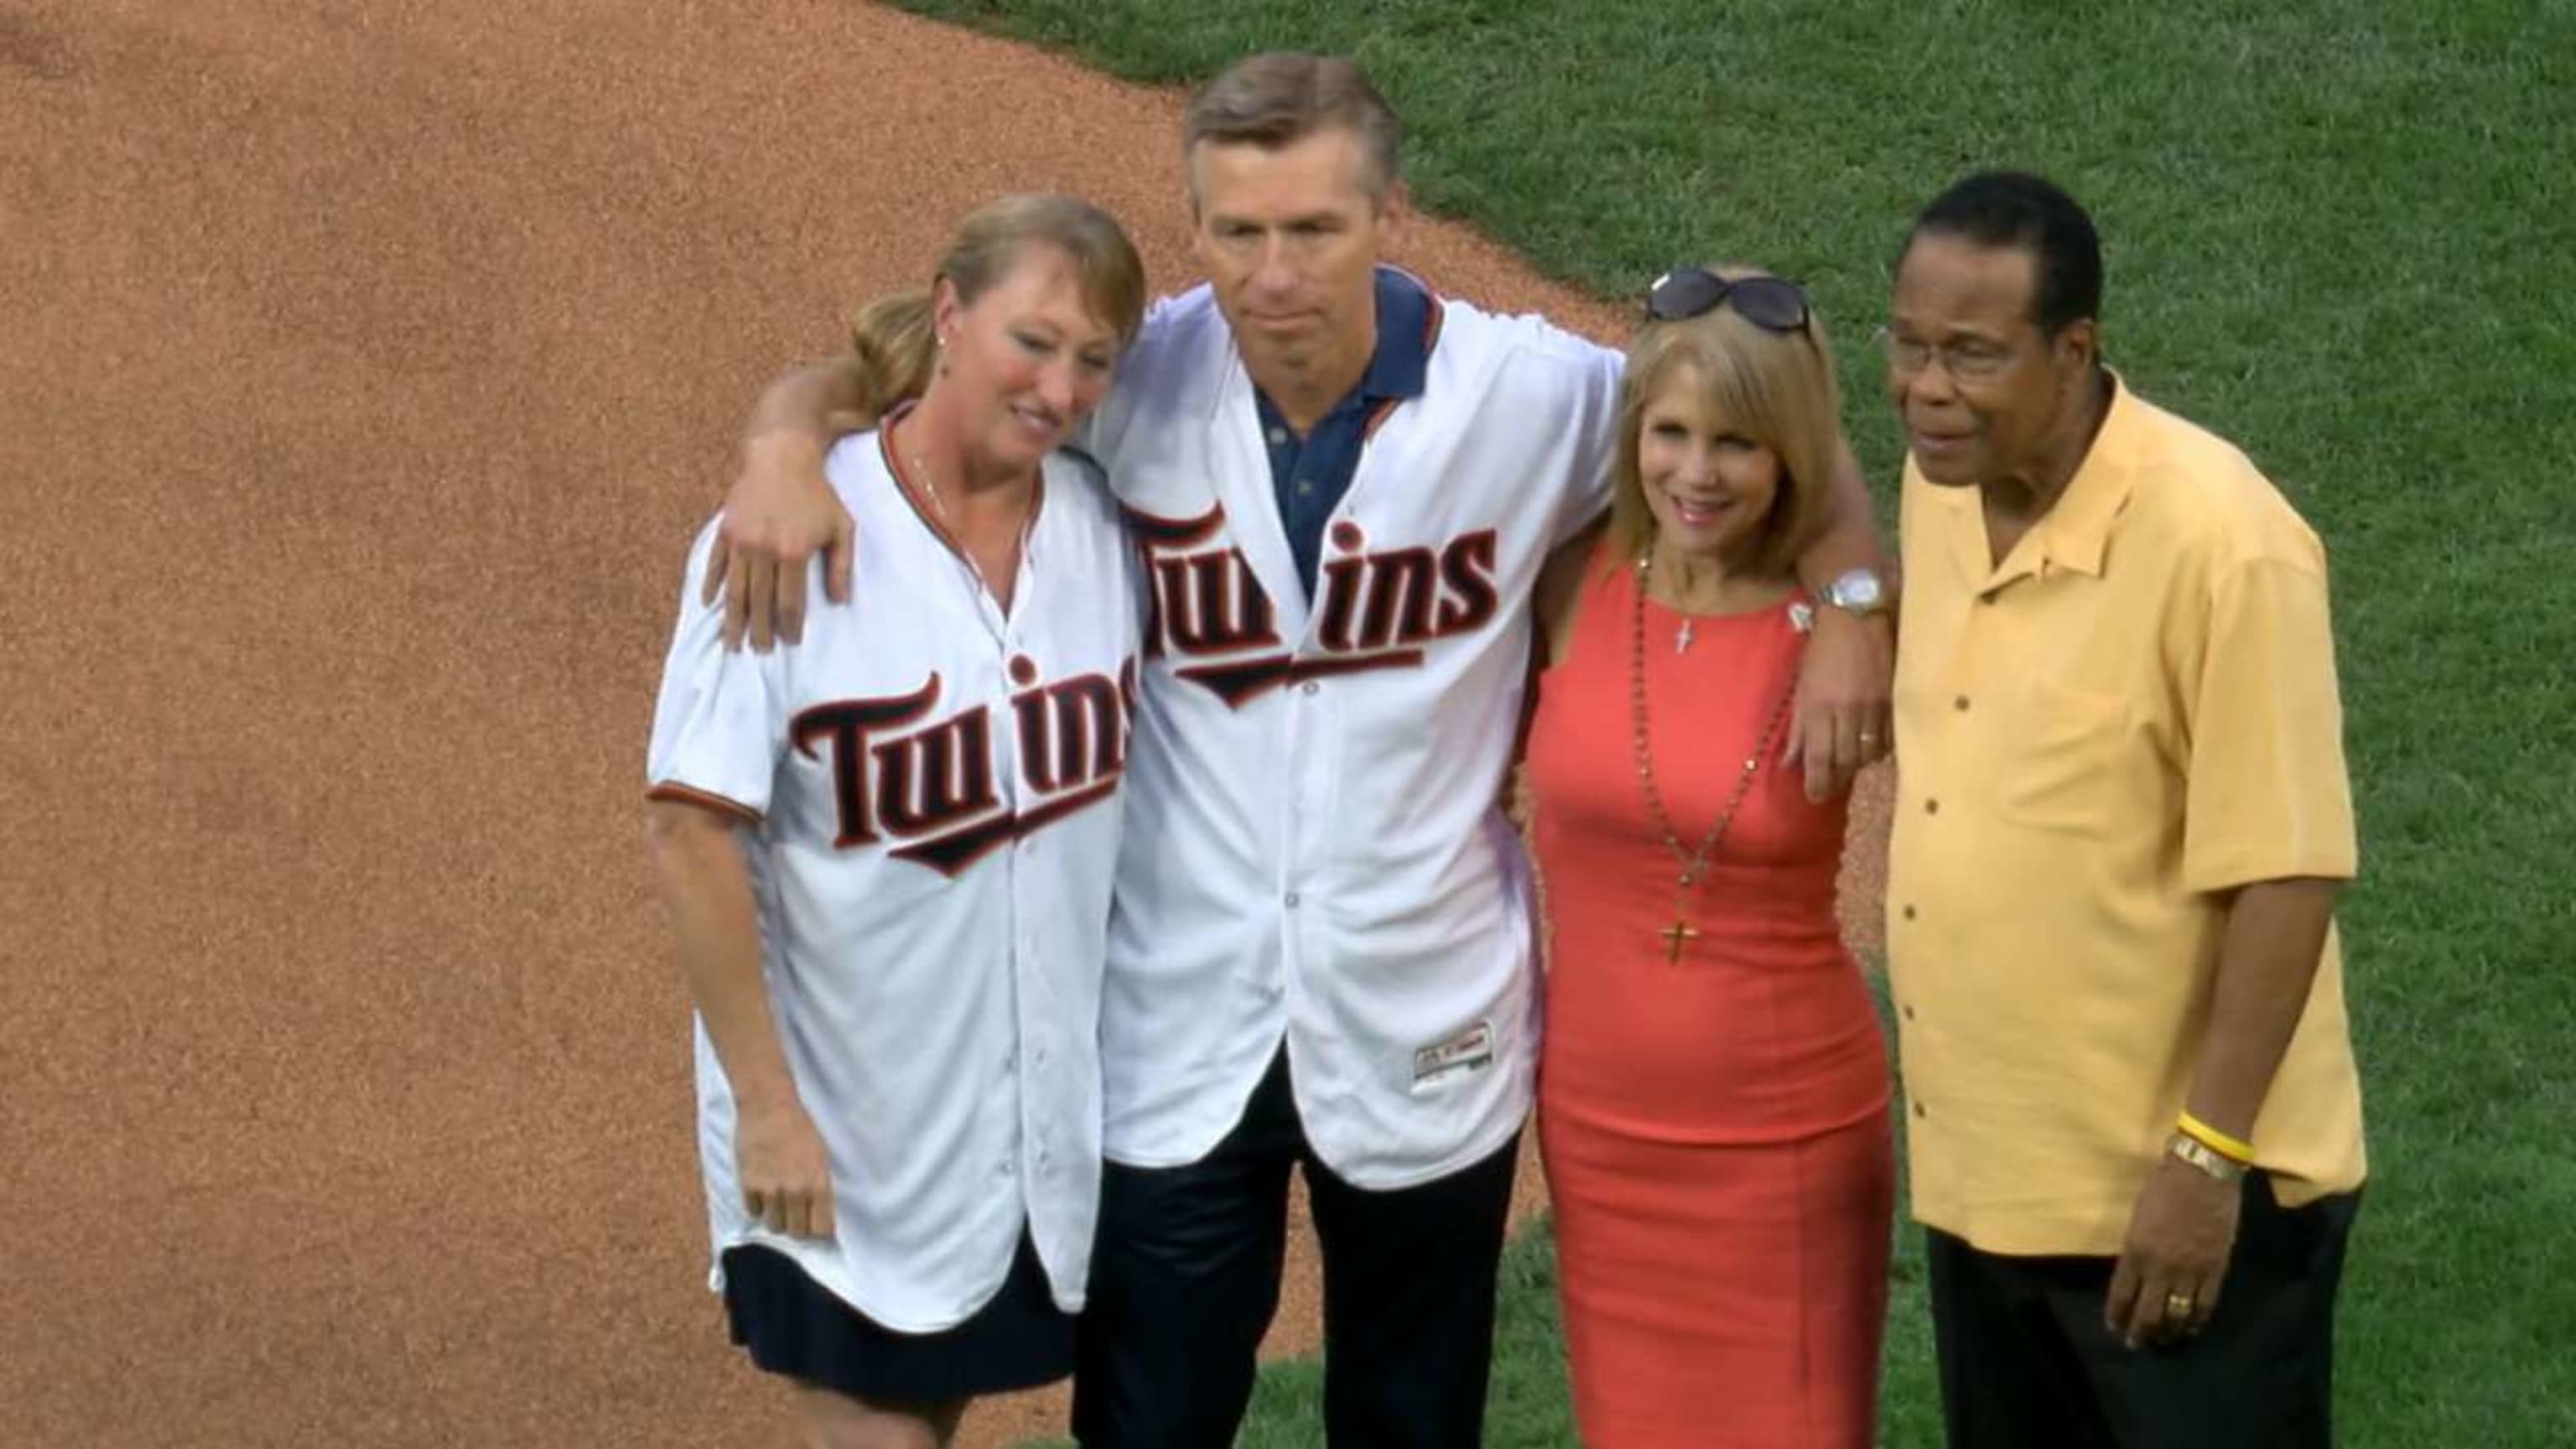 Rod Carew, Biography, Stats, & Facts